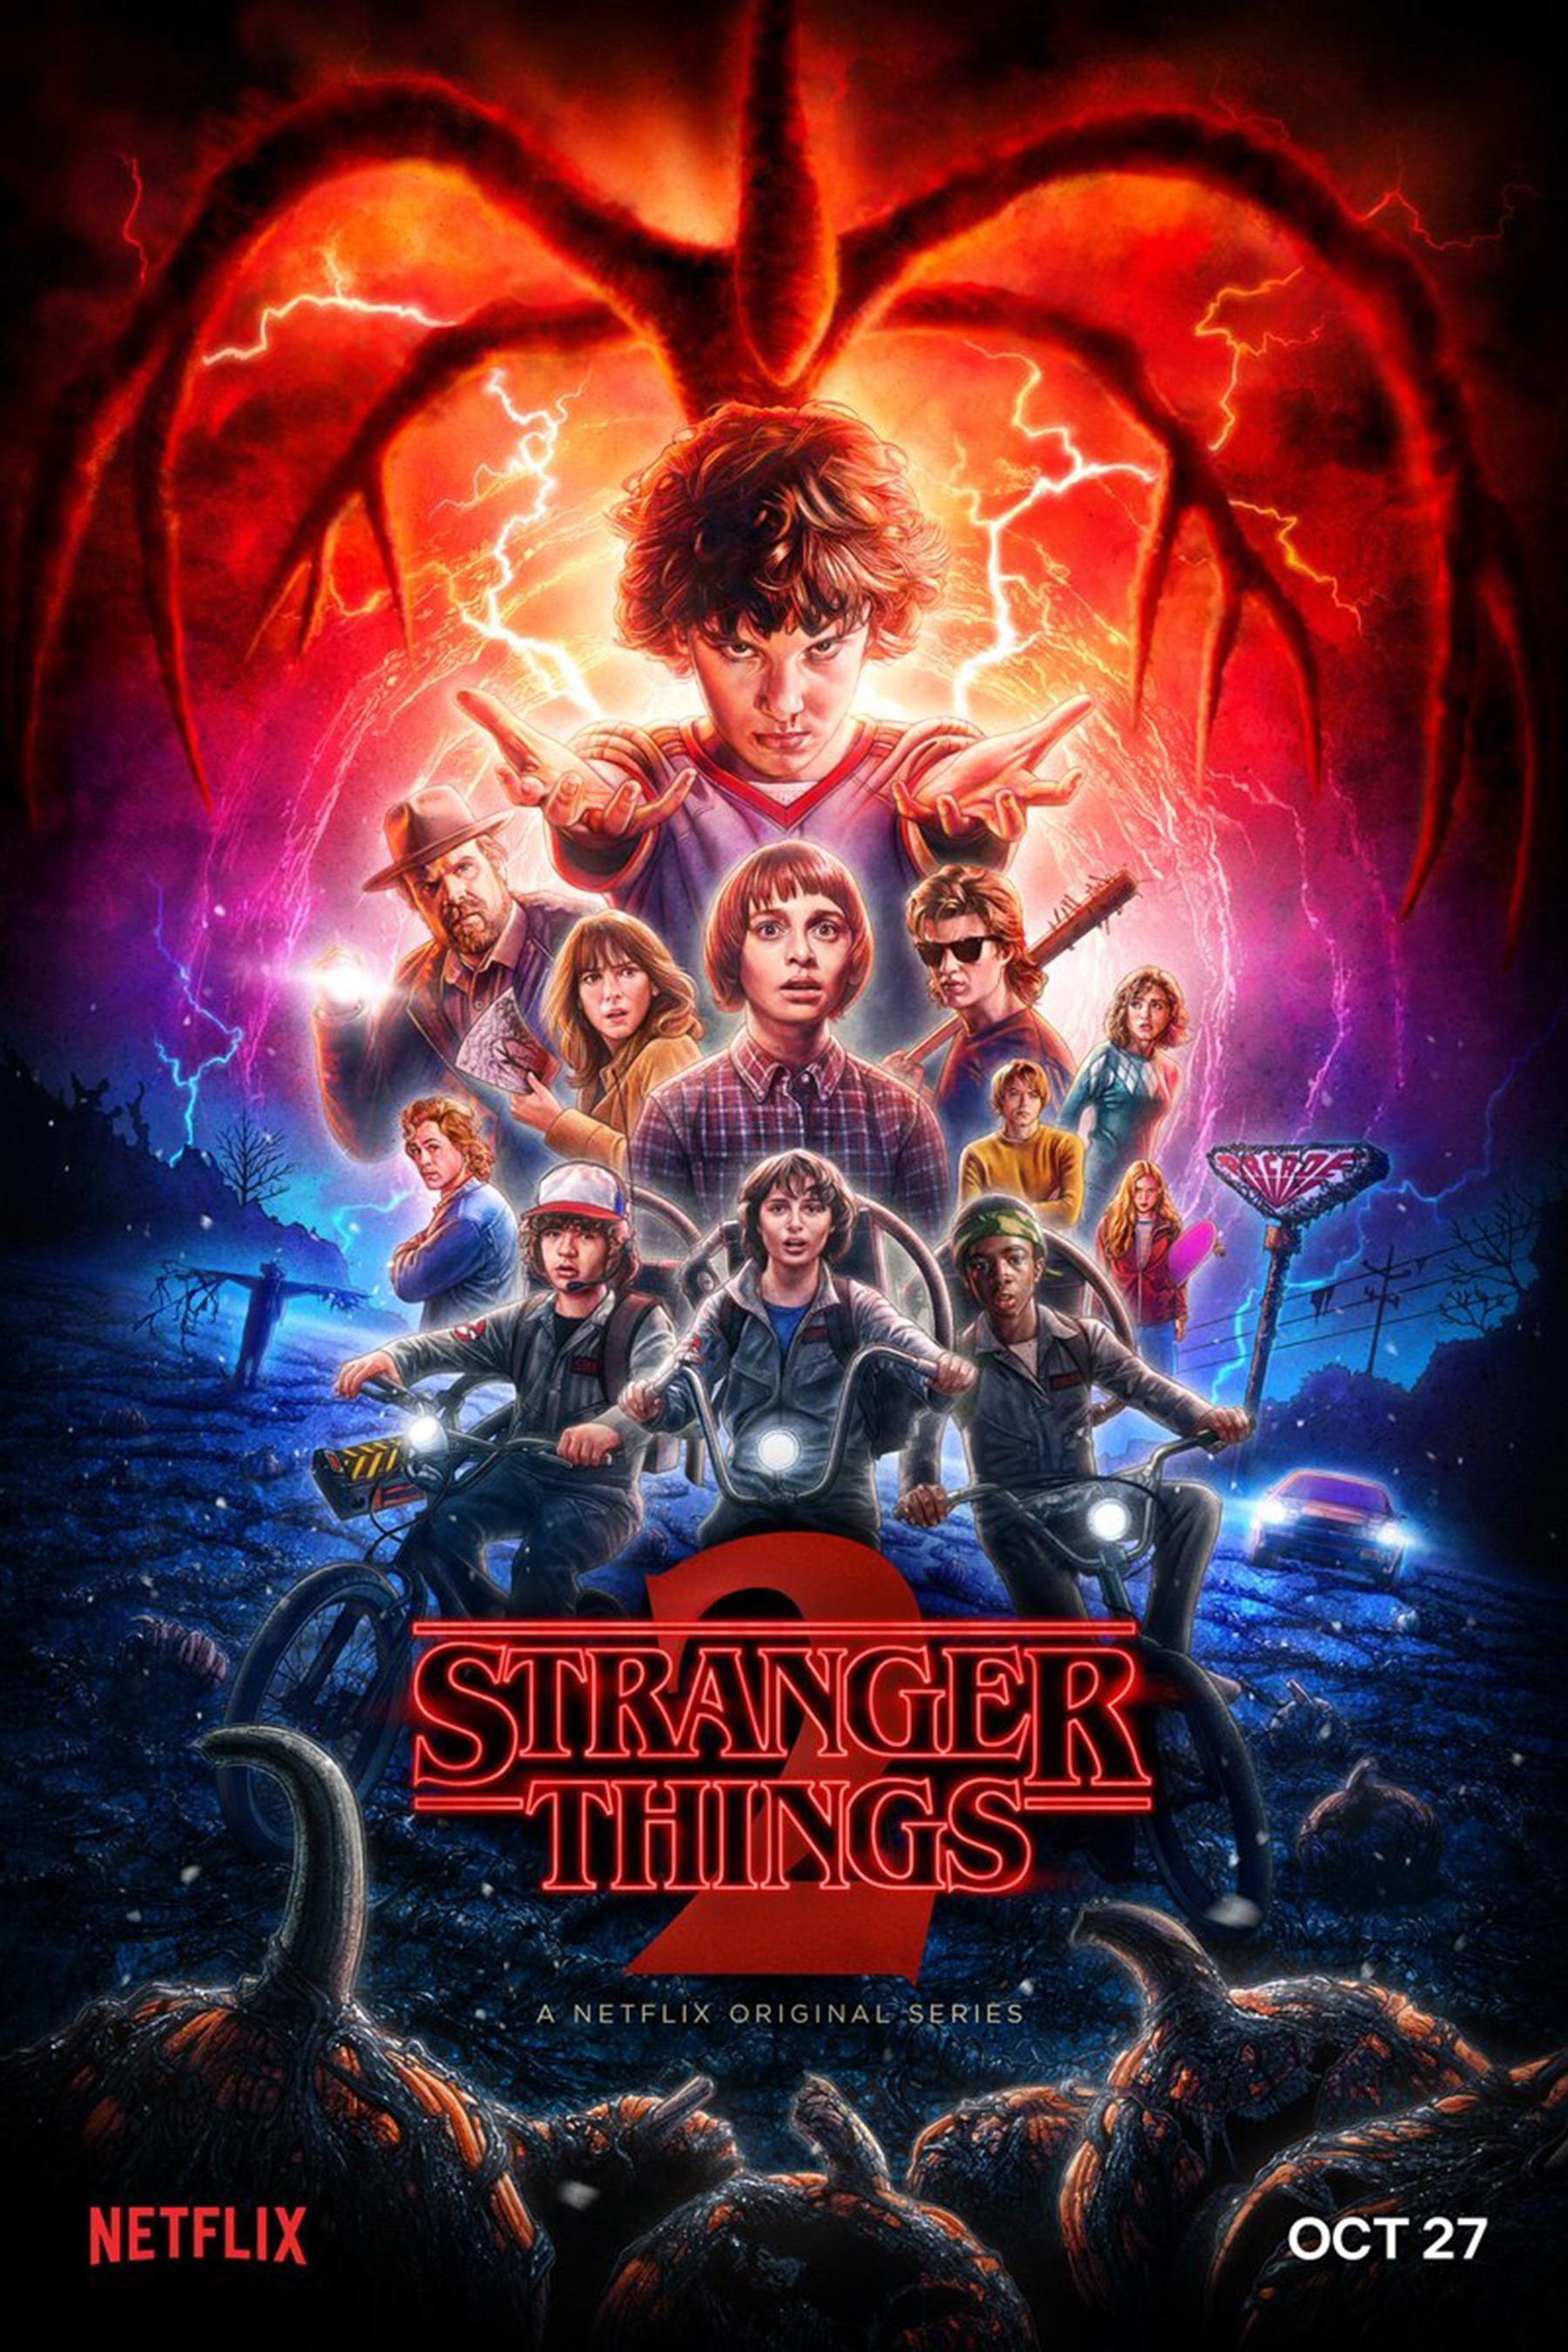 10 Most Popular Stranger Things FULL HD 1080p For  iPhone Wallpapers  Free Download